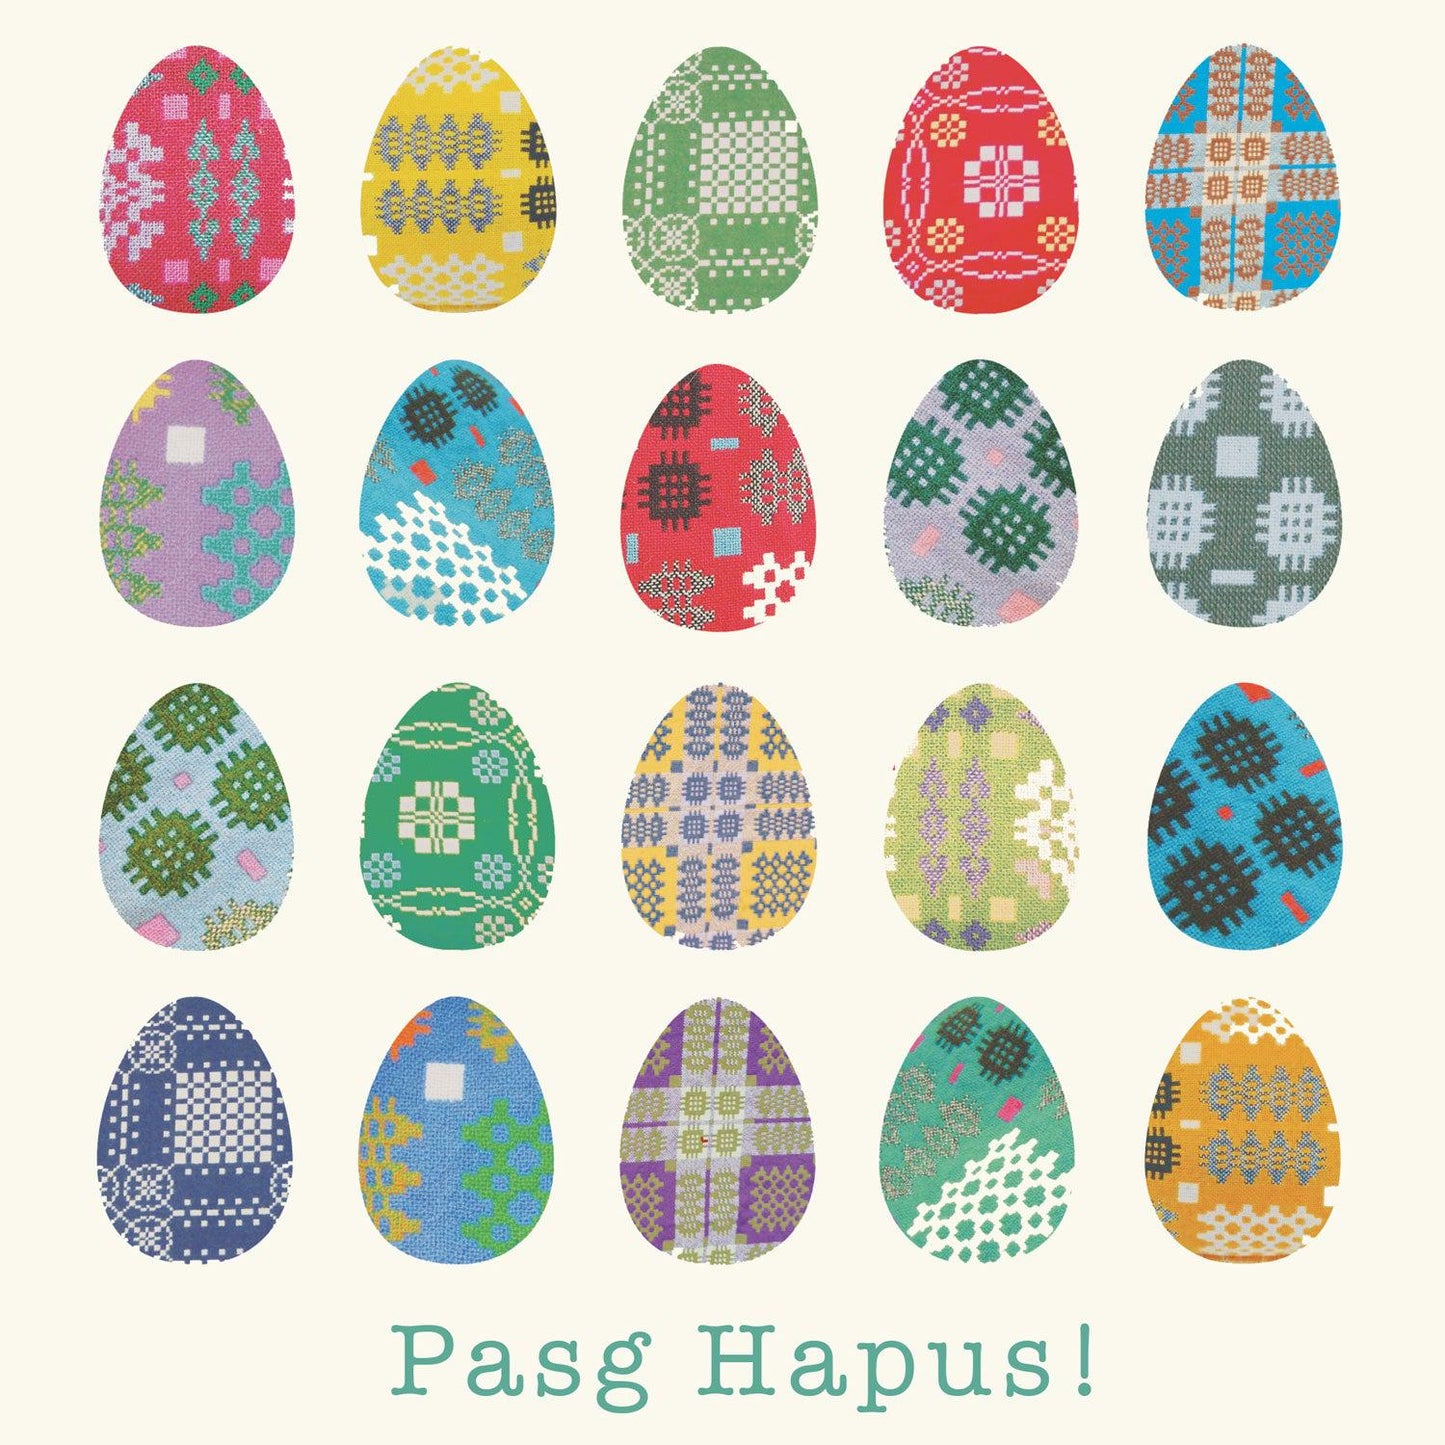 Card - Easter Eggs - Pasg Hapus / Happy Easter!